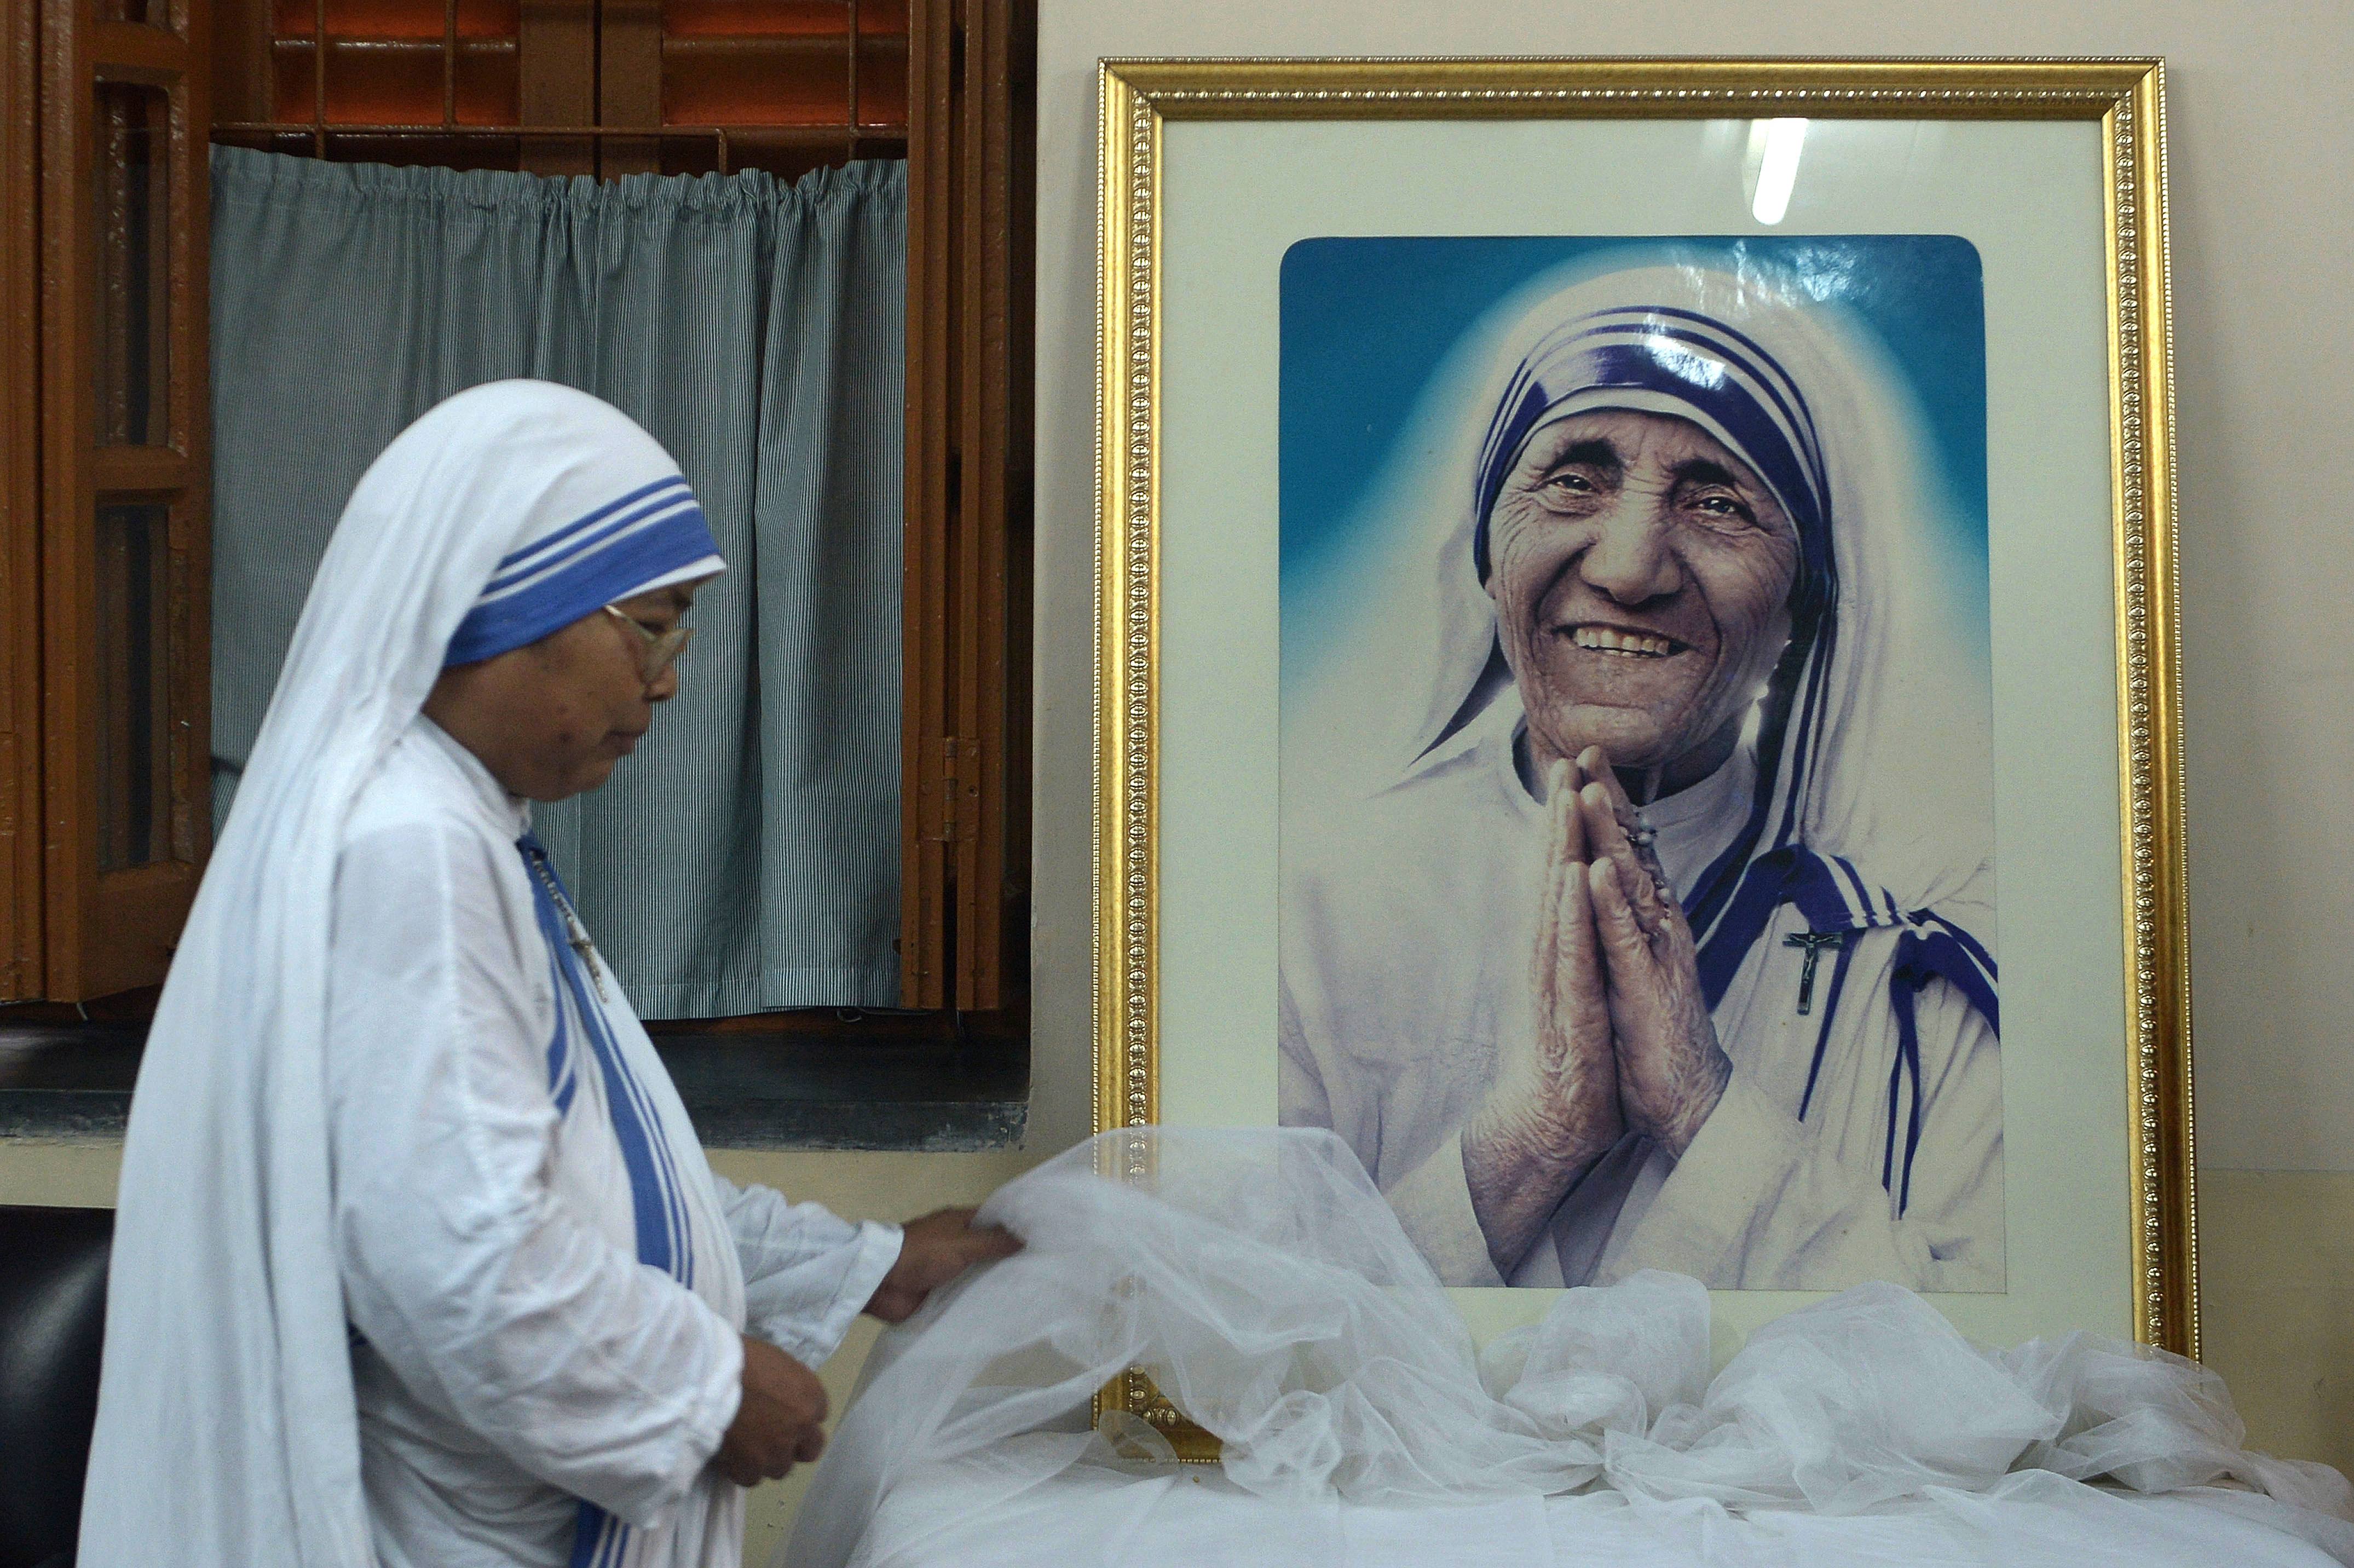 TOPSHOT - A nun of ?the Missionaries of Charity decorates a picture of Mother Teresa prior to a special prayer service at Mother House in Kolkata on December 18, 2015. Mother Teresa, set to become a saint after the Vatican announced recognition of her second miracle, became a global symbol of compassion for her care of the sick and destitute. AFP PHOTO/ DIBYANGSHU SARKAR / AFP / DIBYANGSHU SARKAR